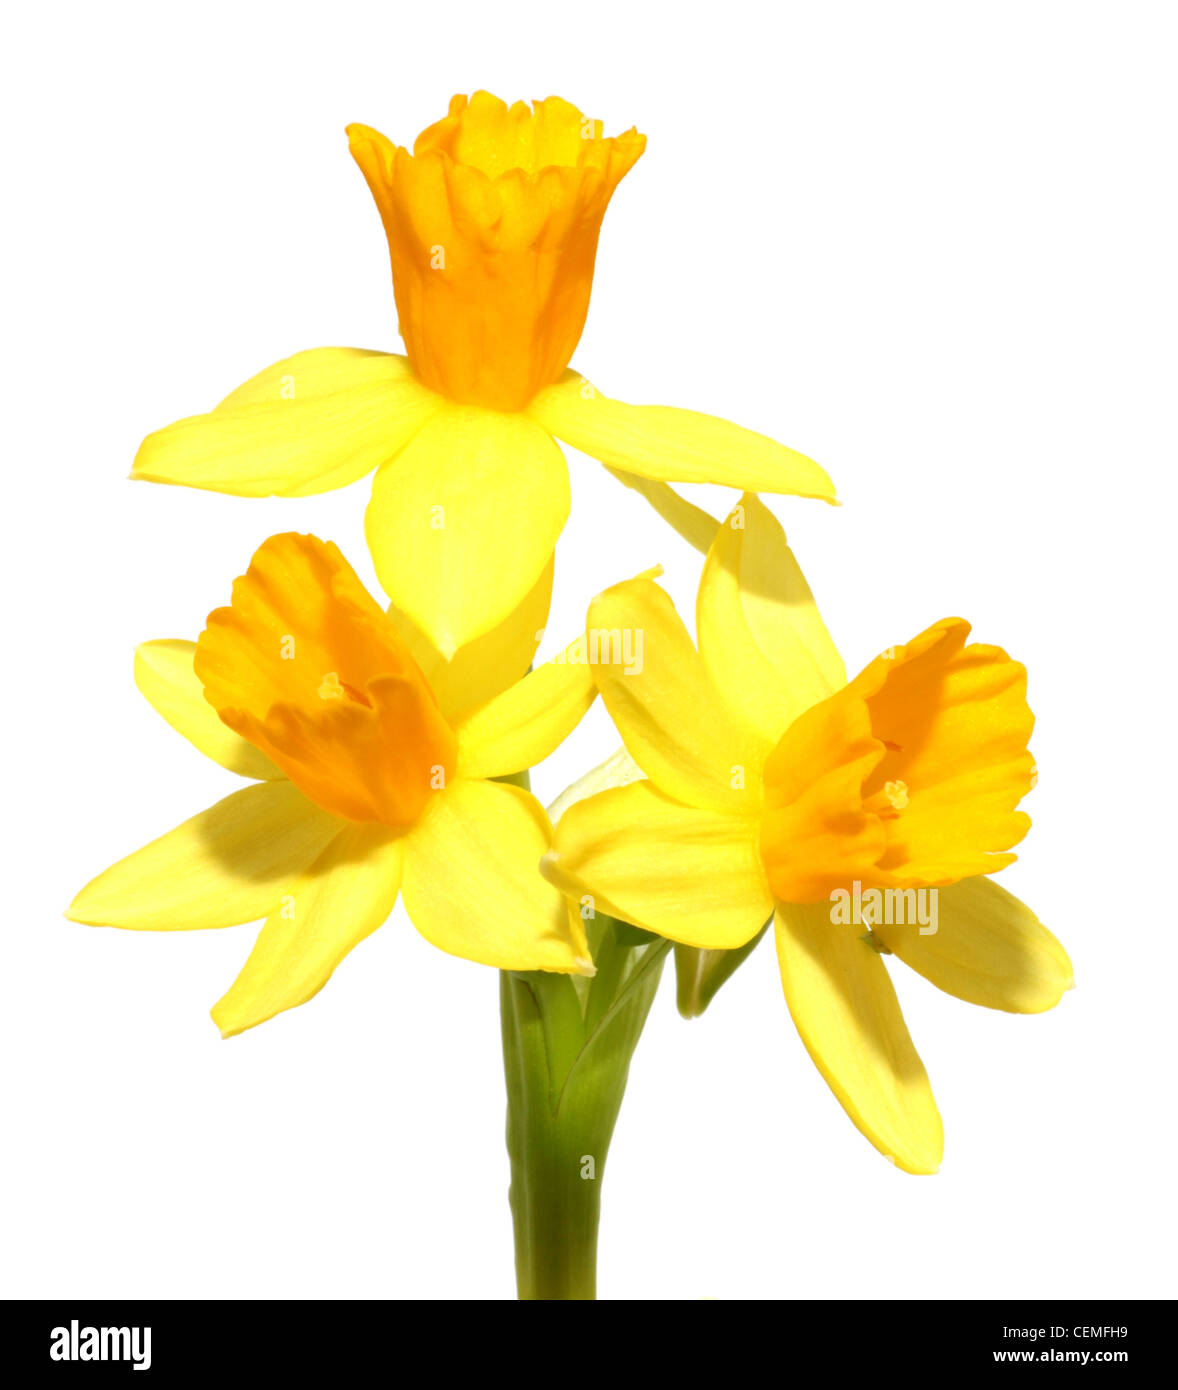 Three daffodils isolated on white background Stock Photo